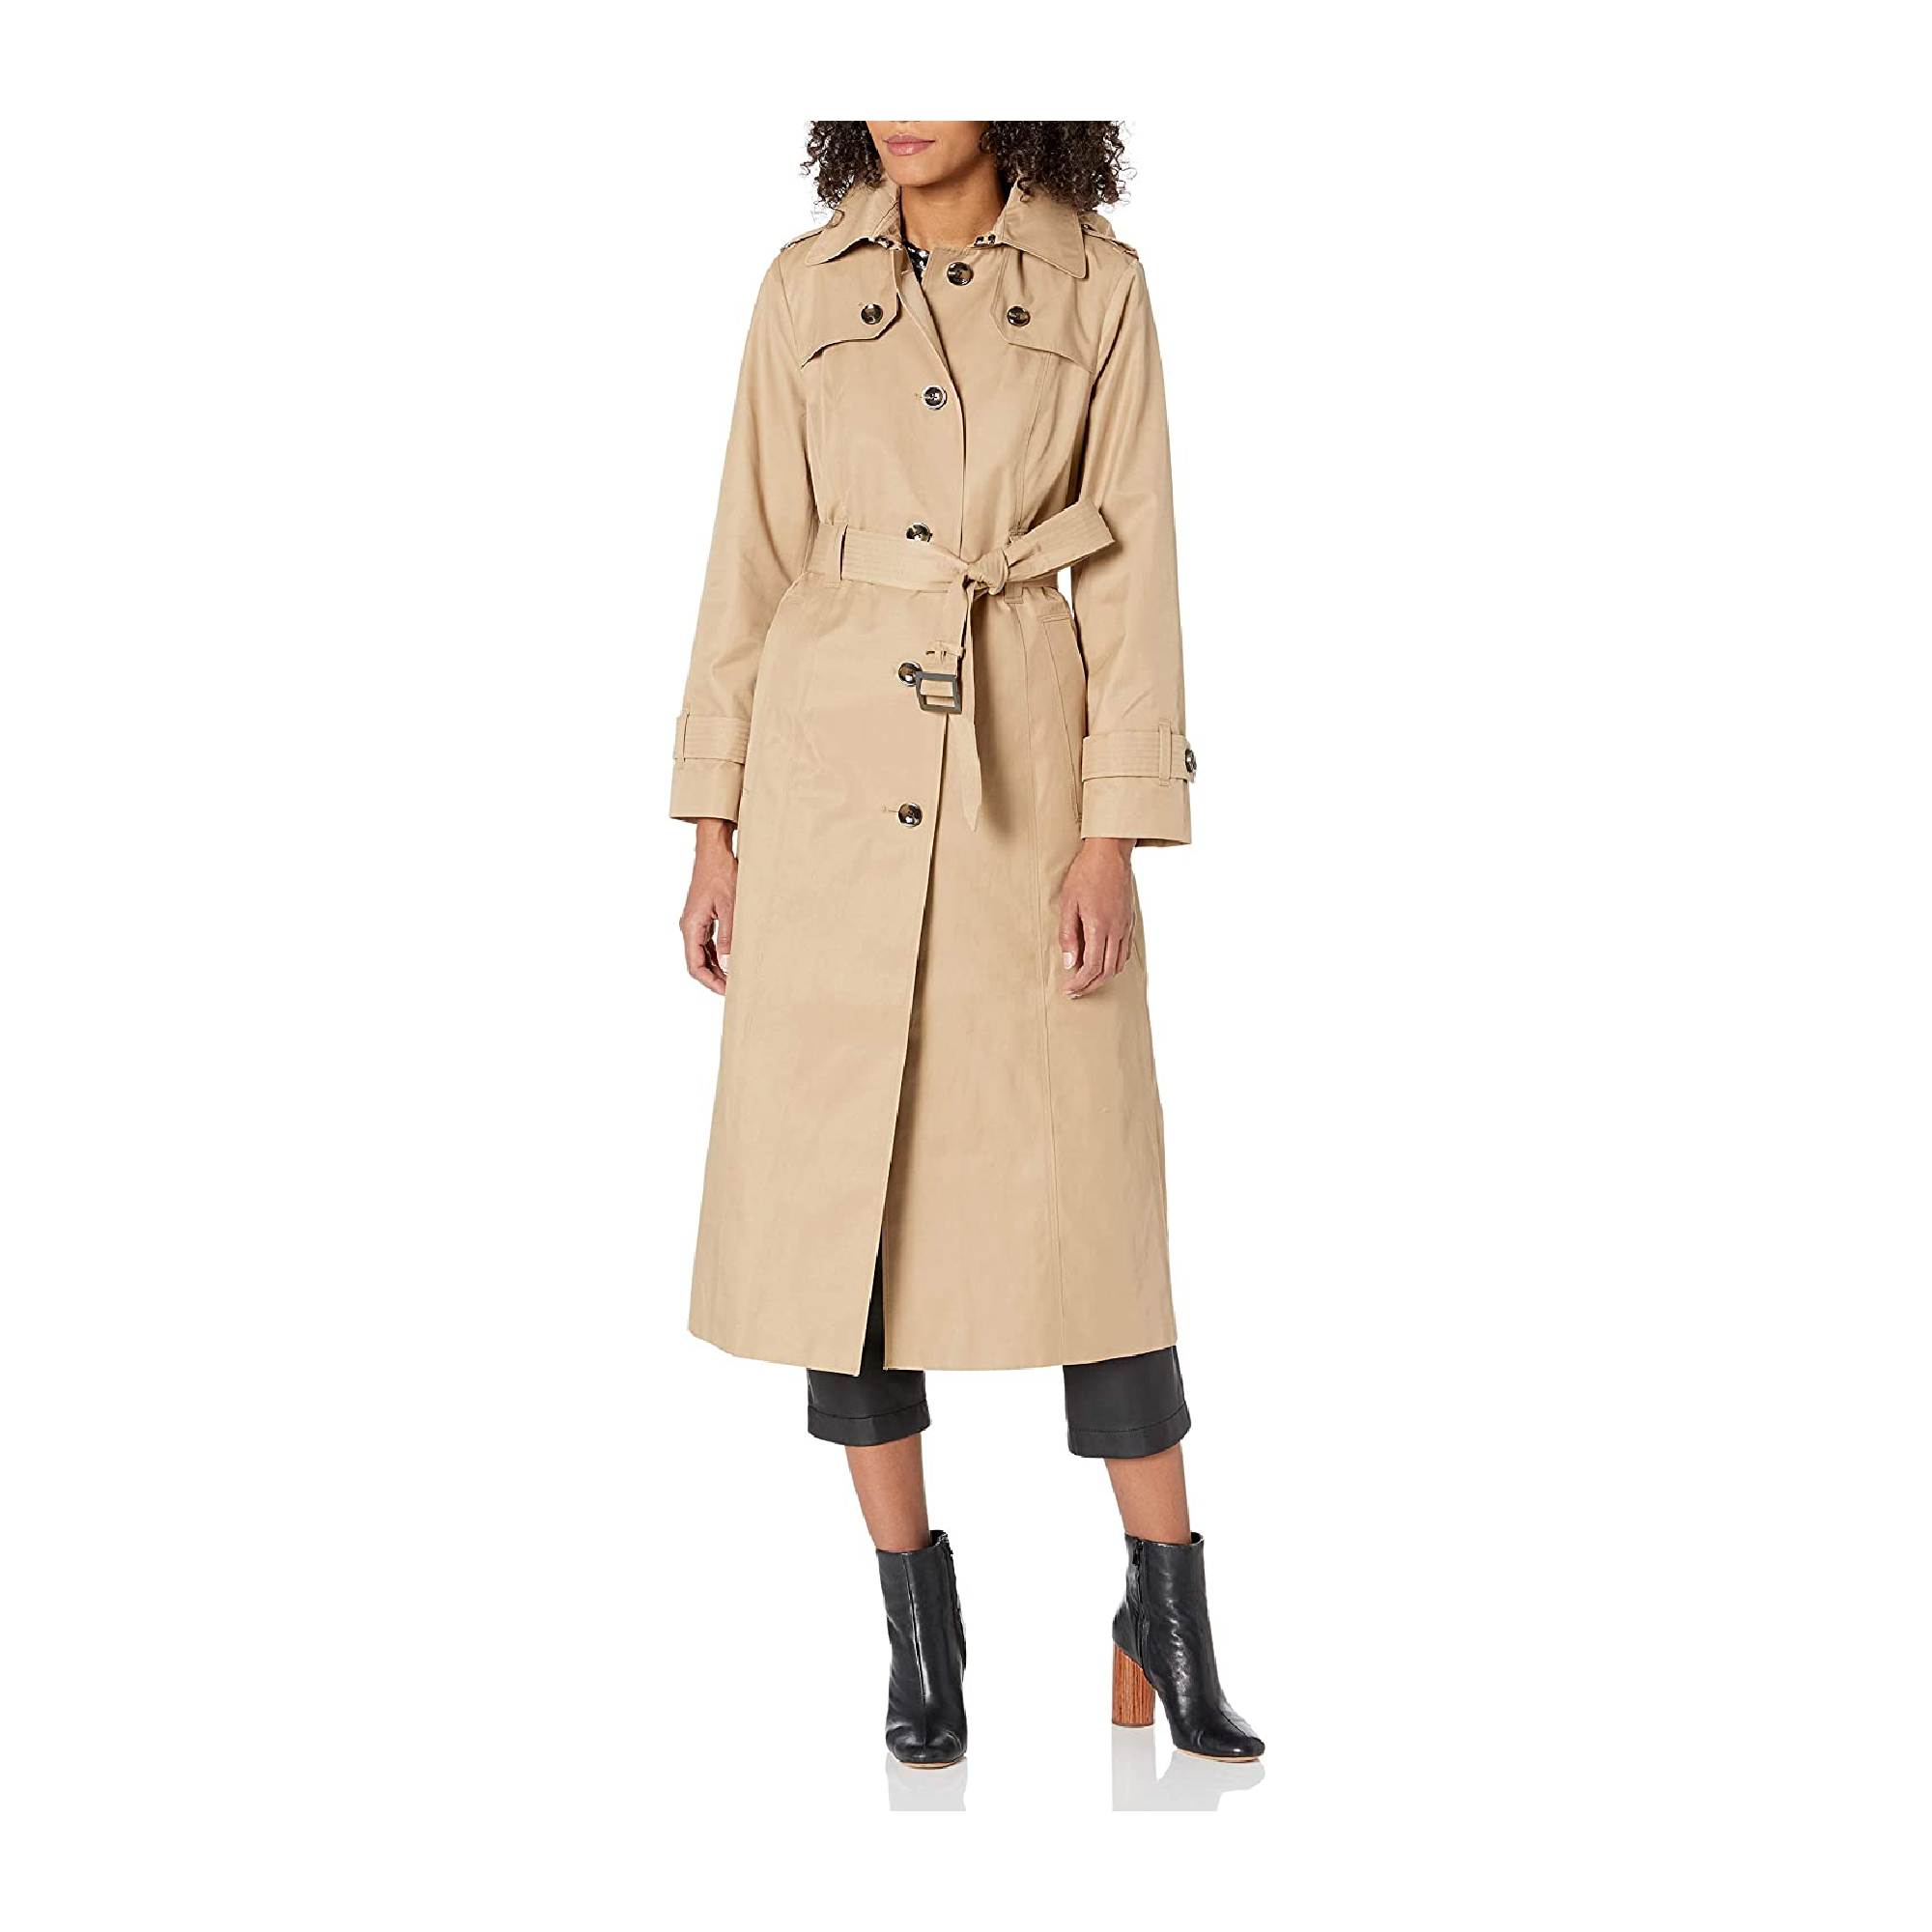 LONDON FOG Women's Single-Breasted Long Trench Coat with Epaulettes and Belt